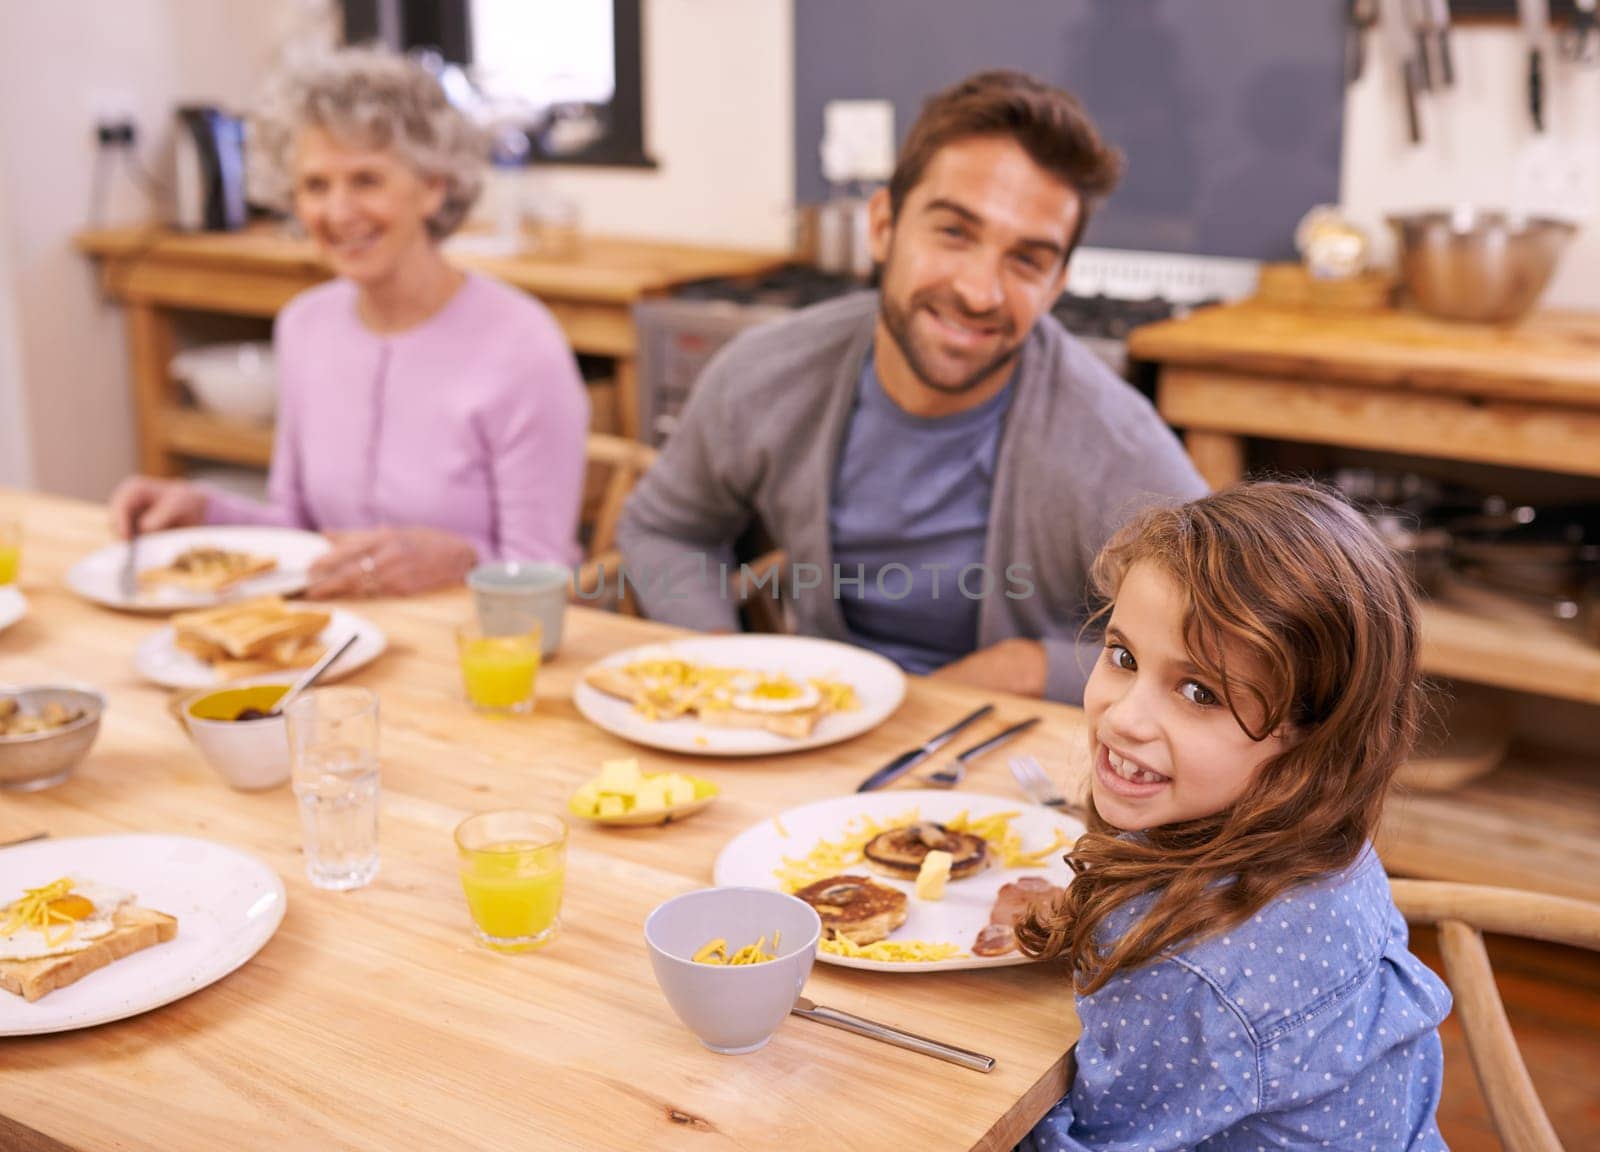 Love, breakfast and family in portrait or kitchen with food, eating or bonding together at table. Meal, pancakes and father or grandmother with child for brunch, nutrition or communication at home.